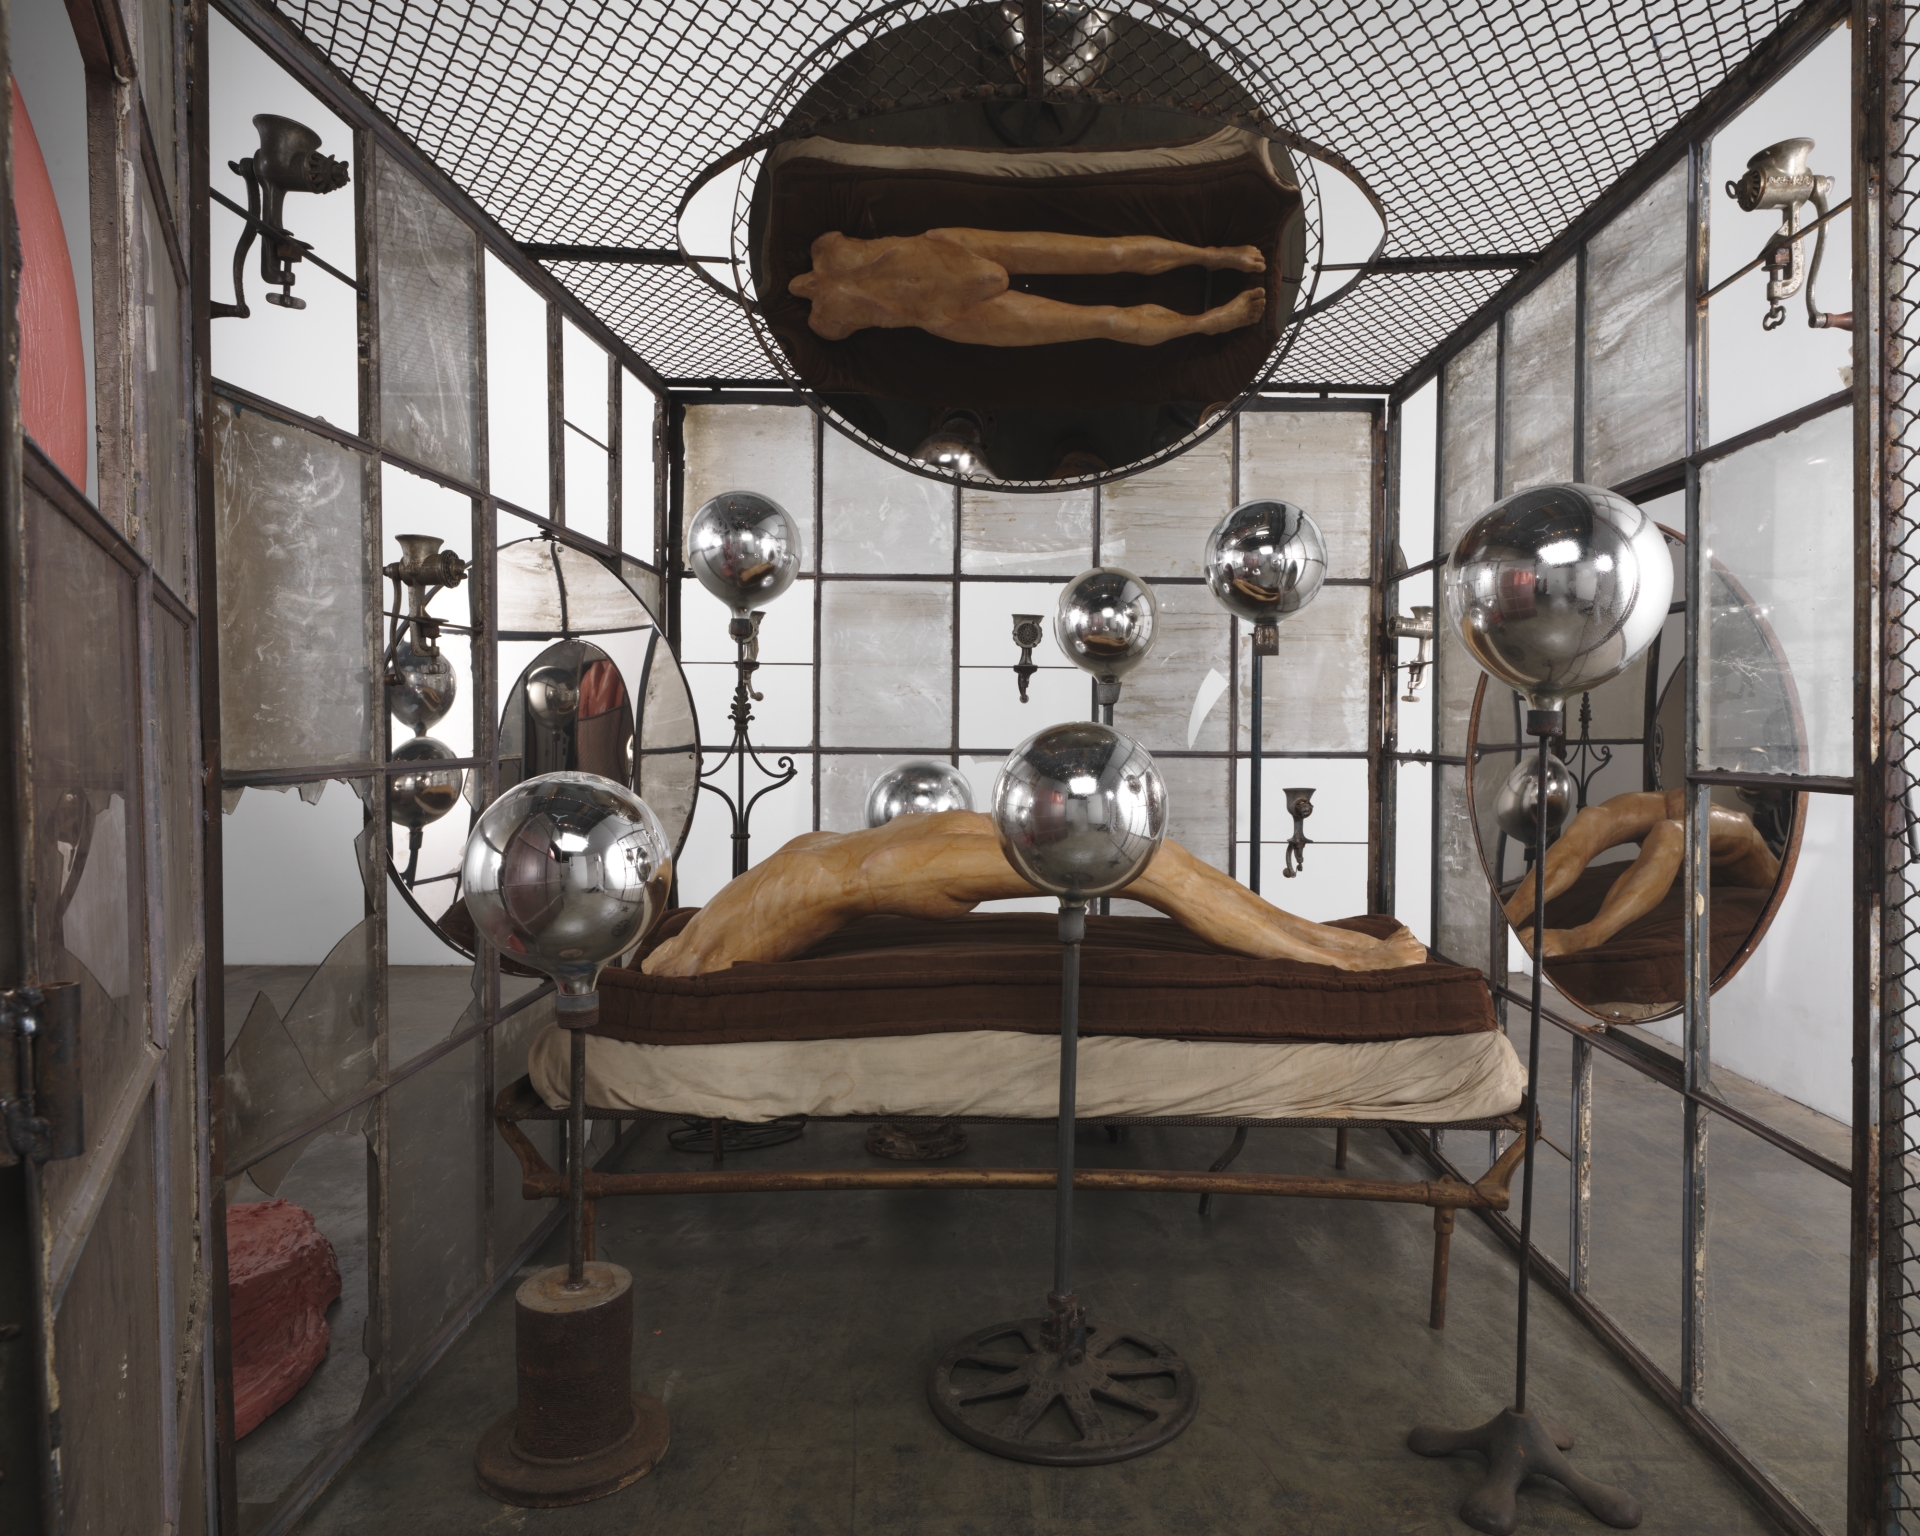 Louise Bourgeois' Cell works at Guggenheim, Bilbao